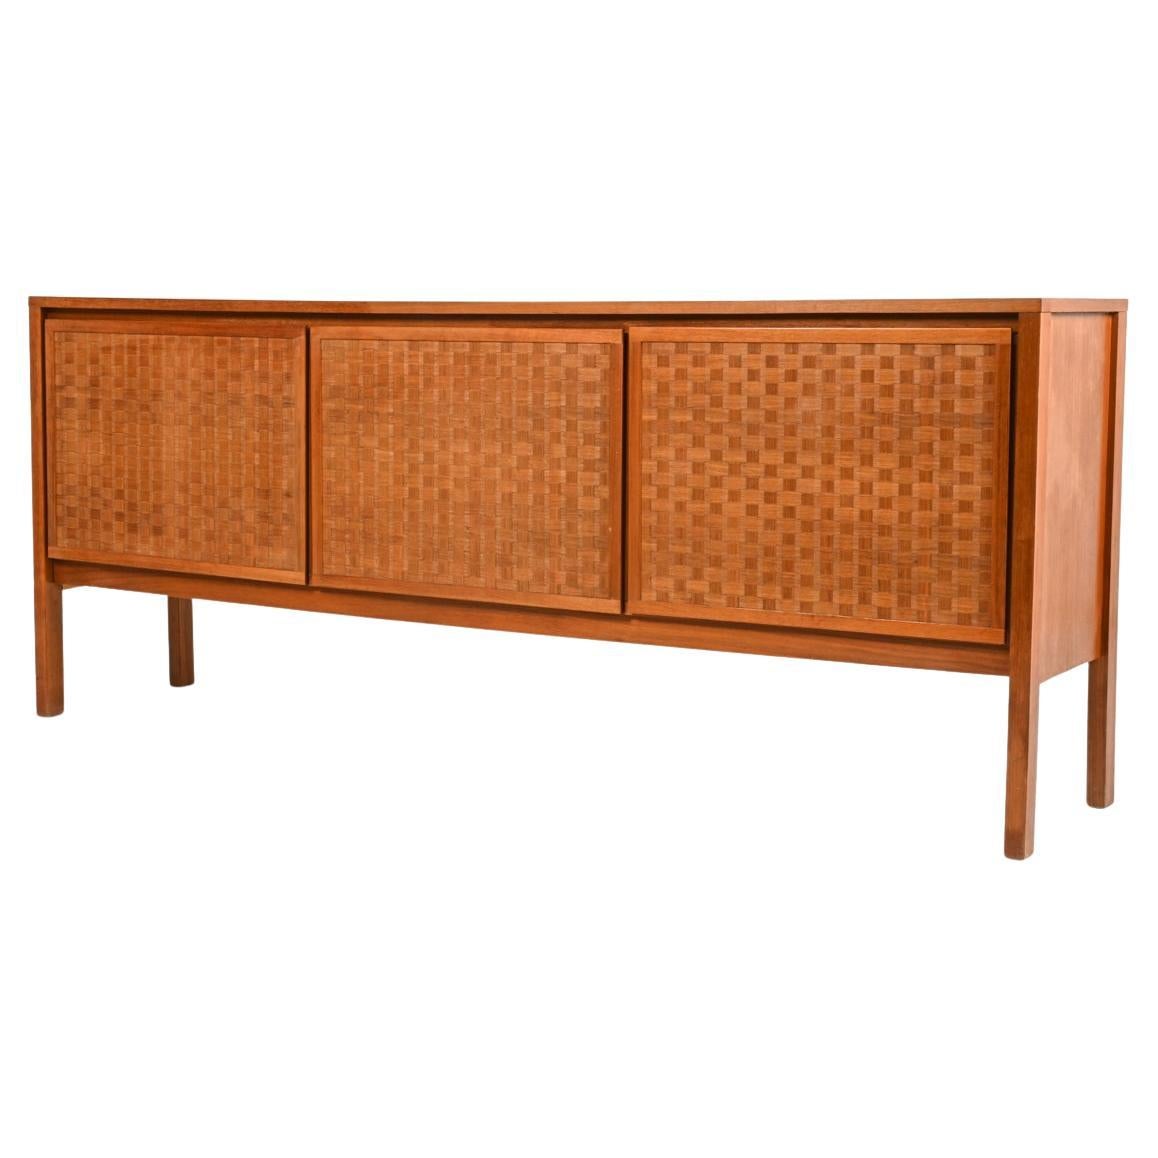 German Mid-Century Teak Woven-Front Sideboard by Leo Bub, c. 1960 For Sale